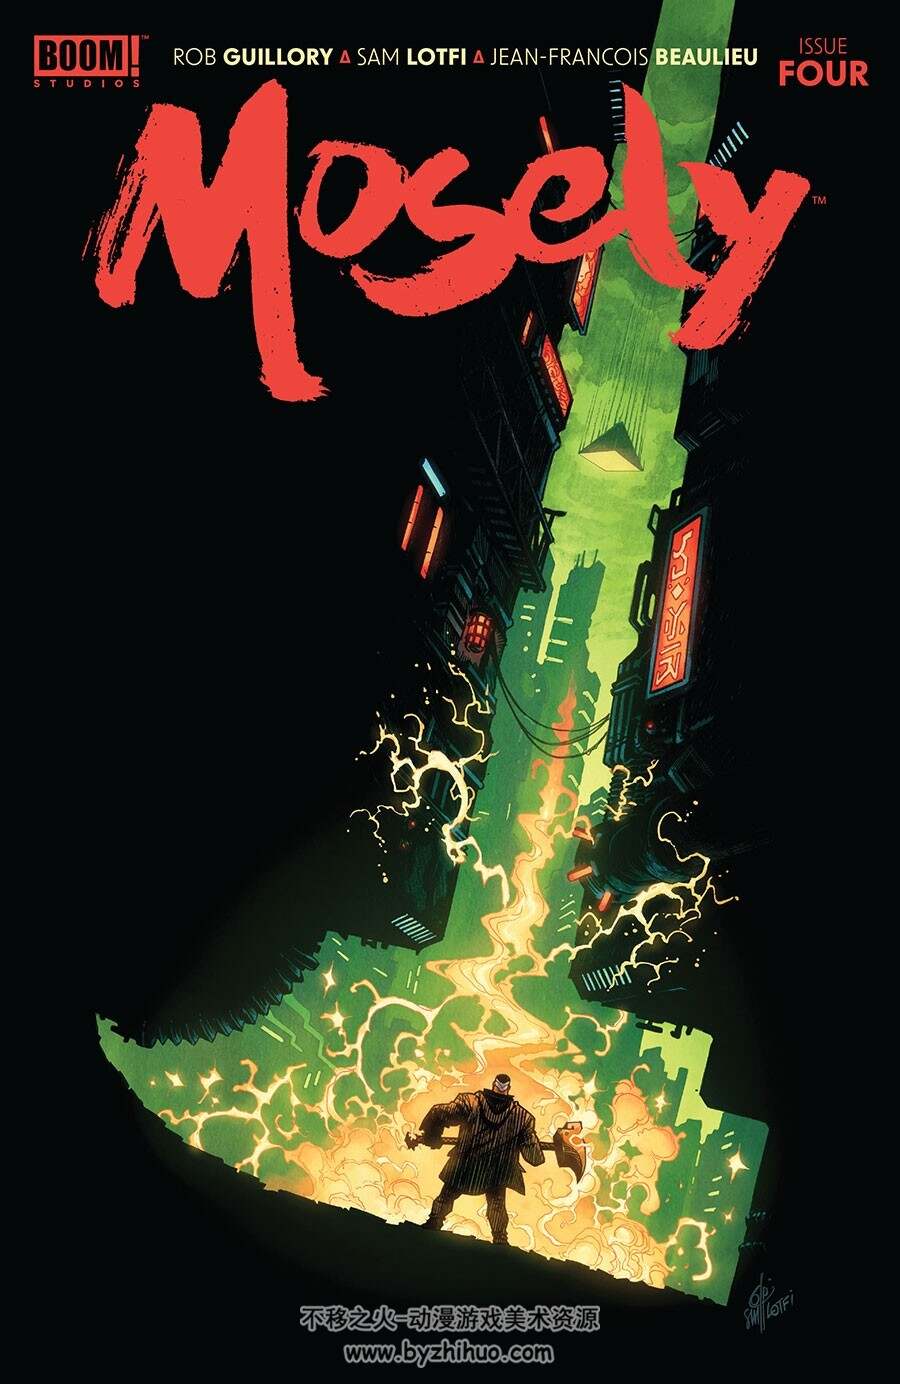 Mosely 第4册 [共5册] Rob Guillory 漫画下载